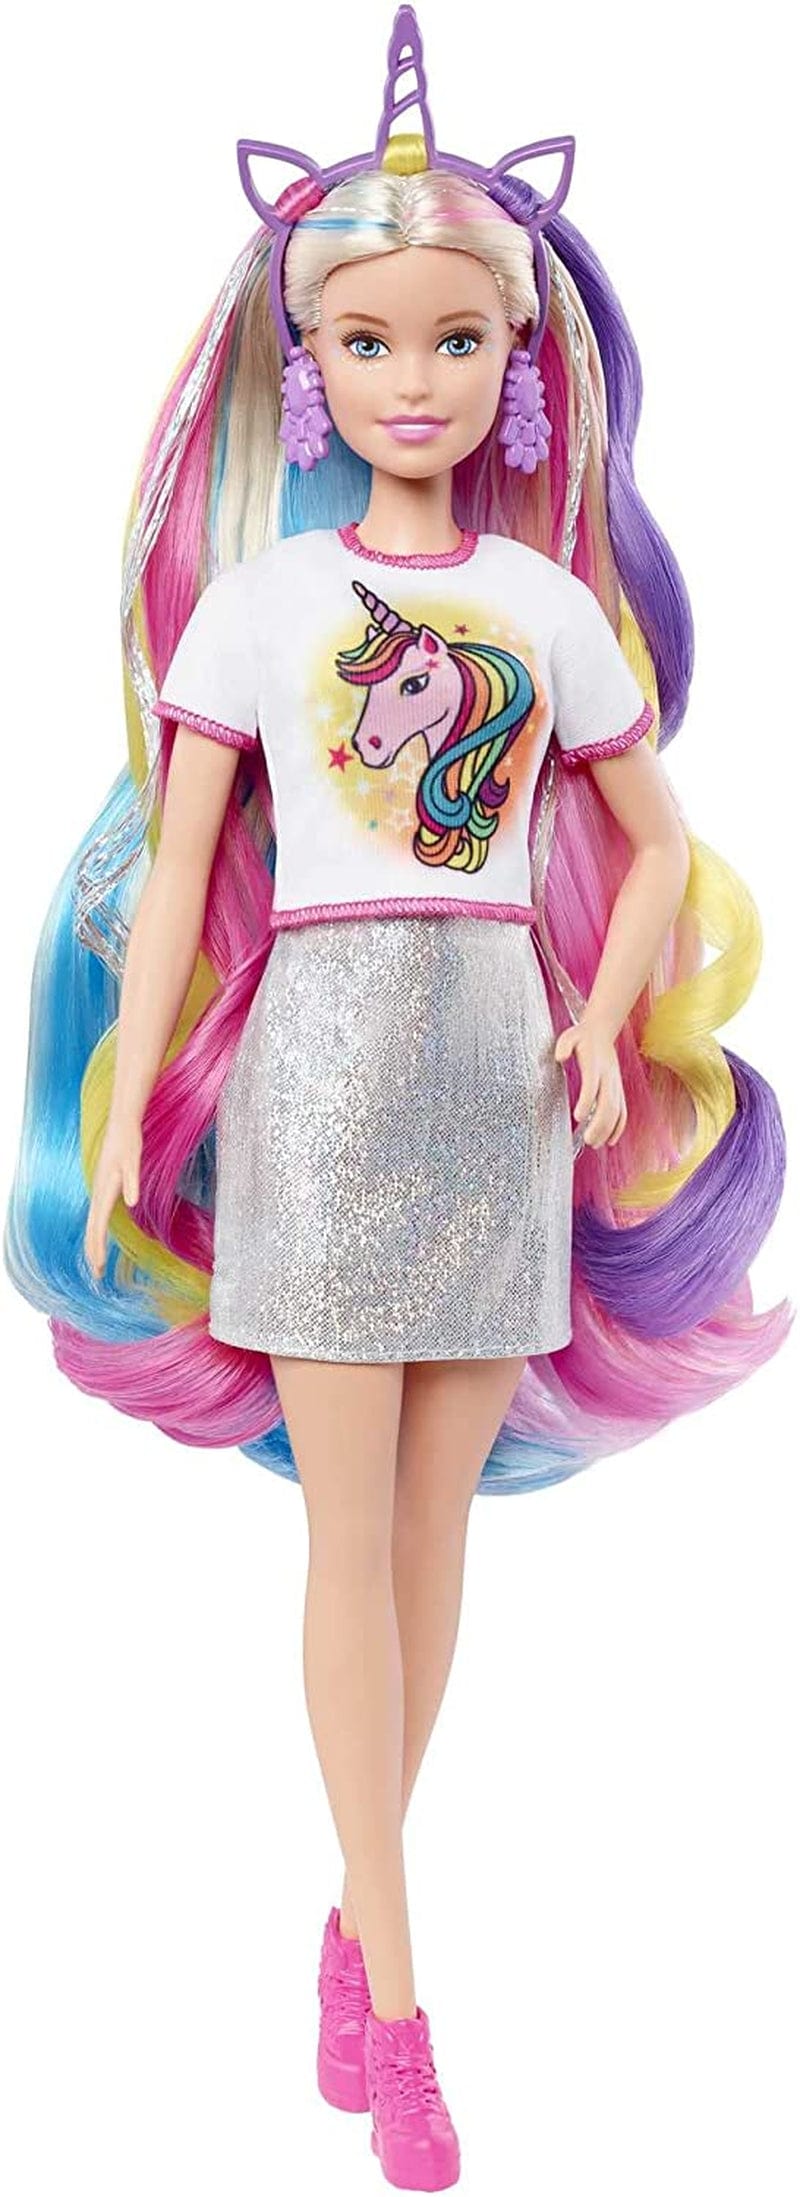 Barbie Fantasy Hair Doll, Blonde, with 2 Decorated Crowns, 2 Tops & Accessories for Mermaid and Unicorn Looks, plus Hairstyling Pieces, for Kids 3 to 7 Years Old Sporting Goods > Outdoor Recreation > Winter Sports & Activities Mattel   